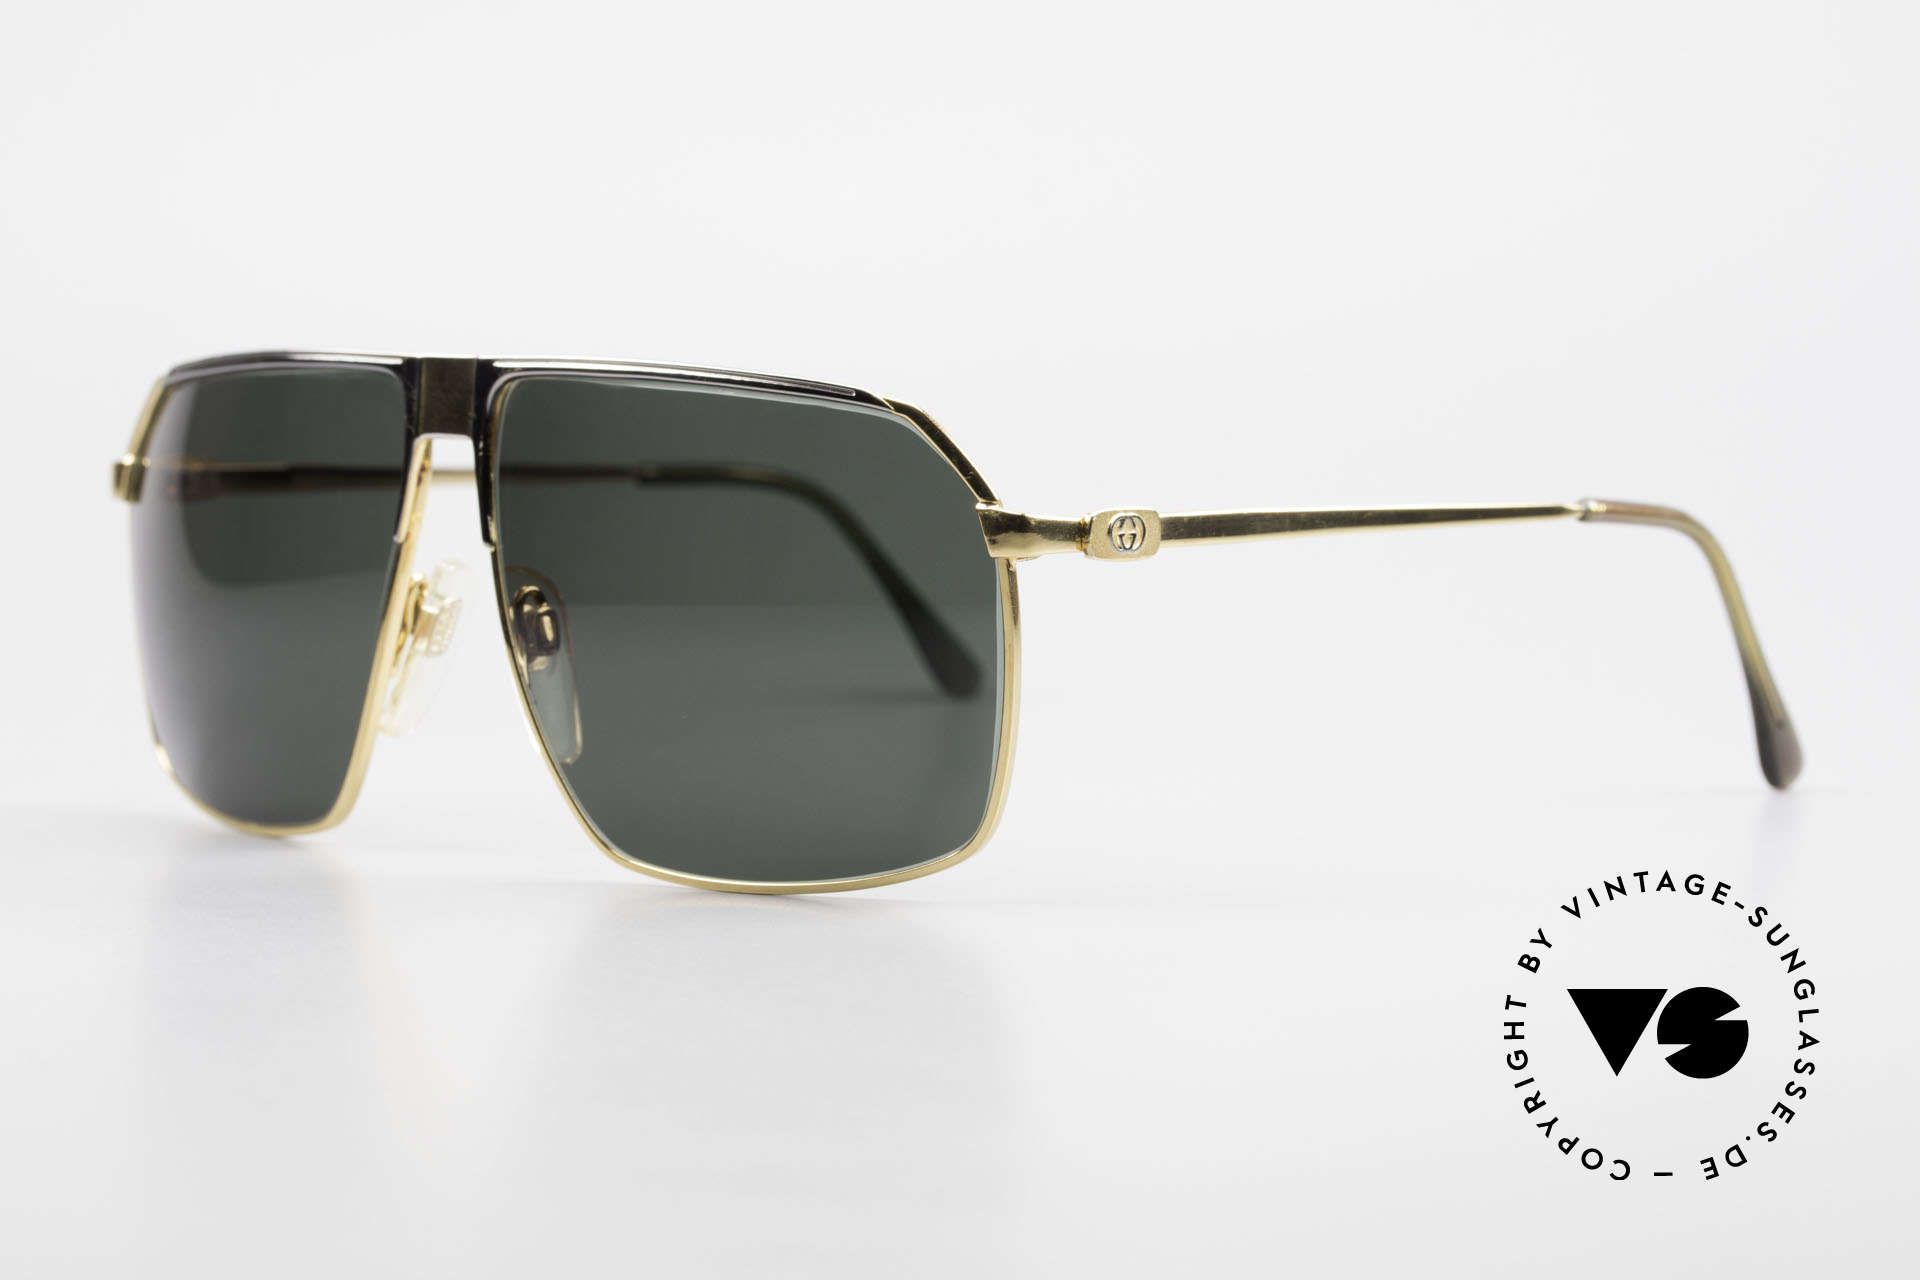 Sunglasses Gucci GG41 22kt Gold-Plated 